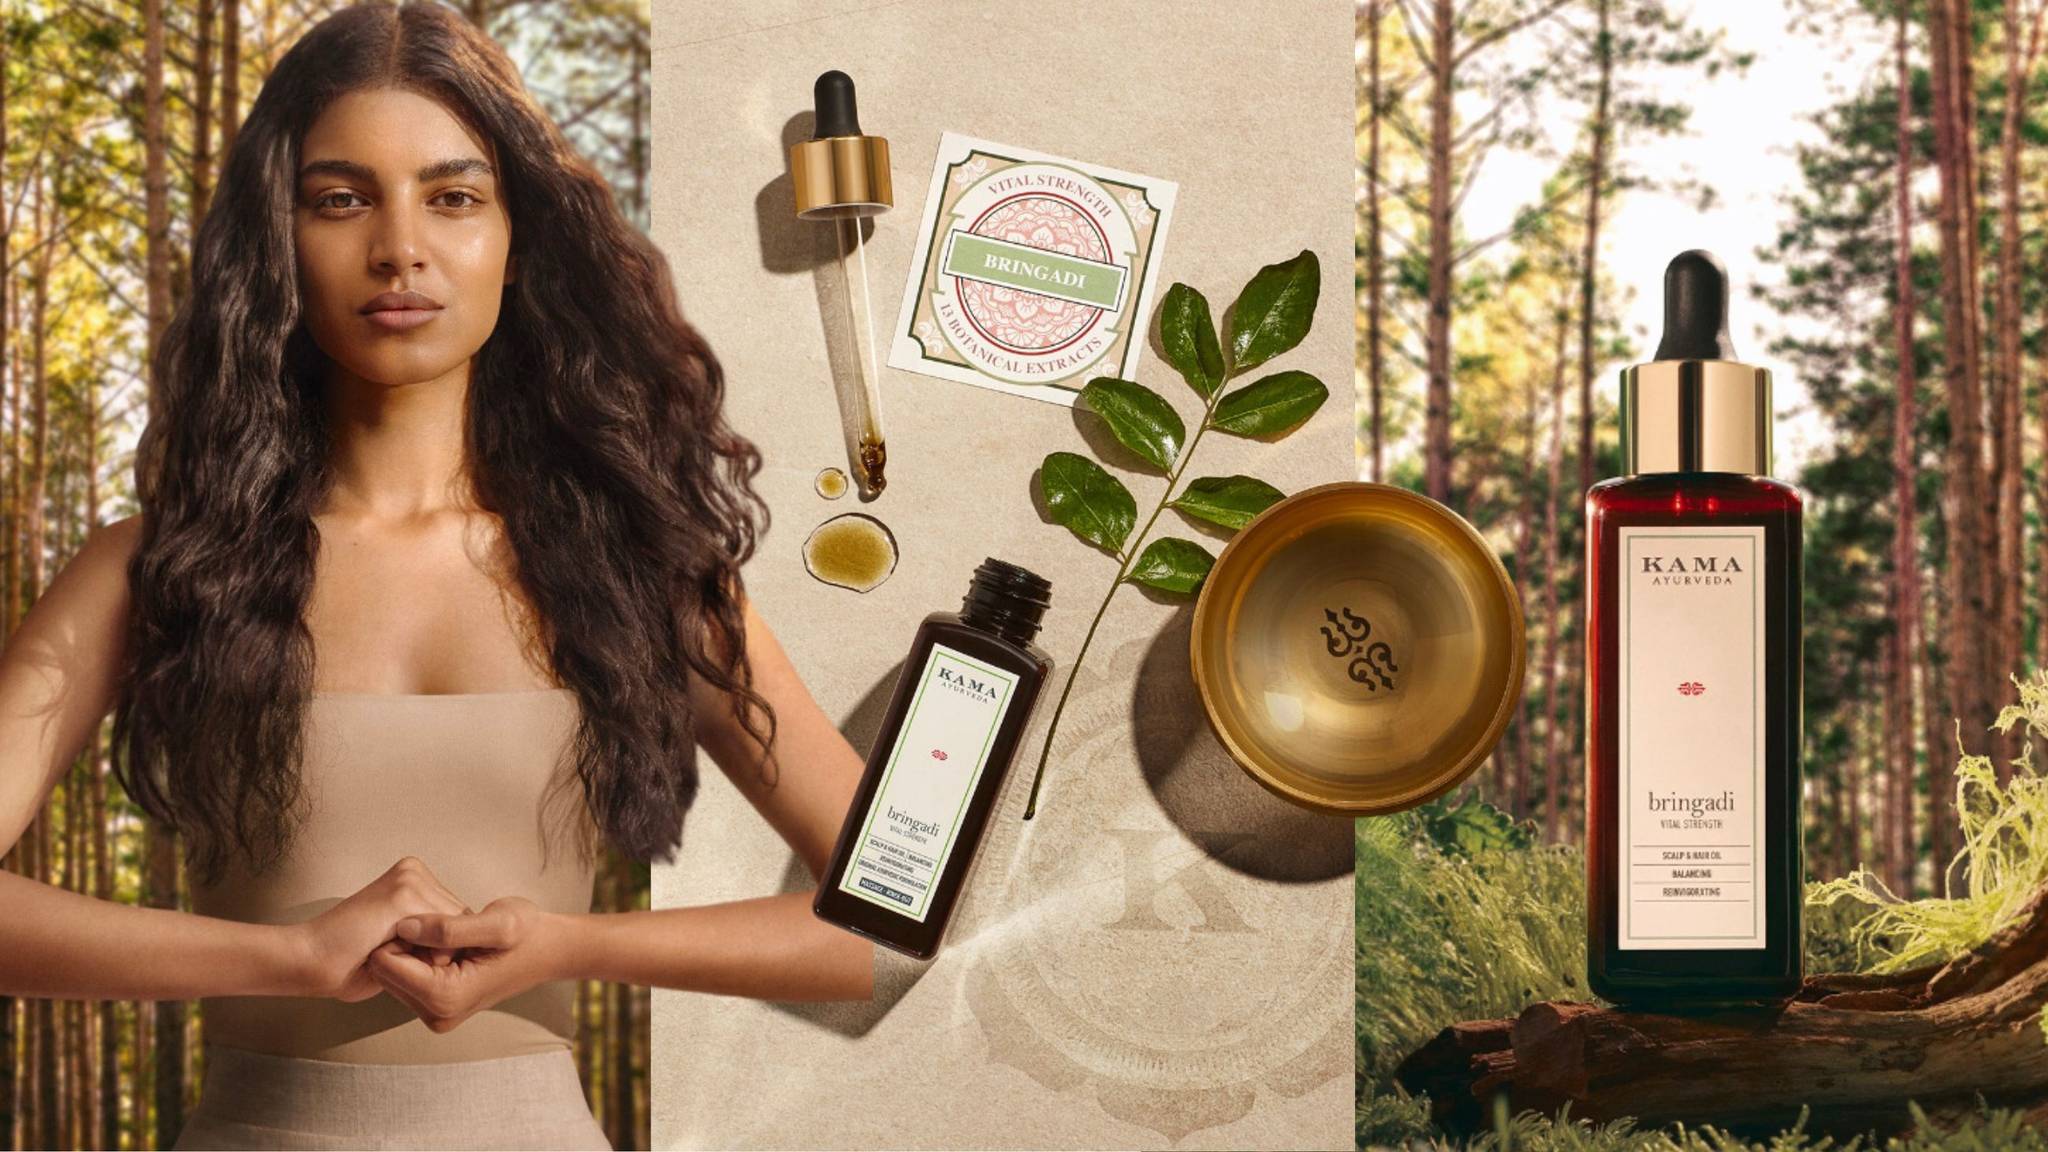 How Kama Ayurveda makes luxury beauty from Indian roots